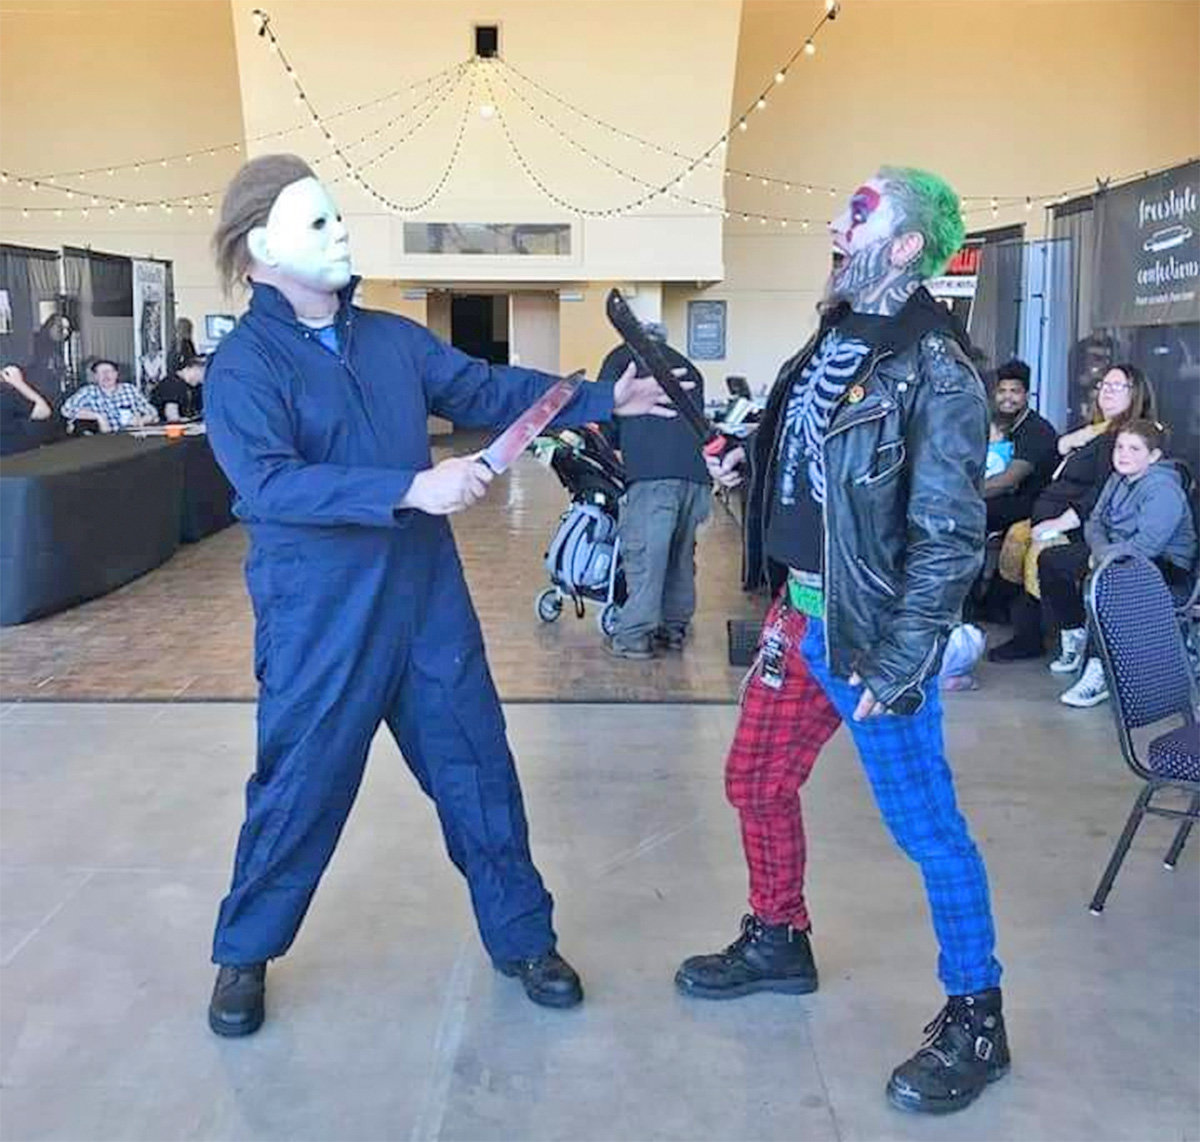 Sci-Fi Horror Fest attendees meet as costumed horror icons on the floor of a previous convention.